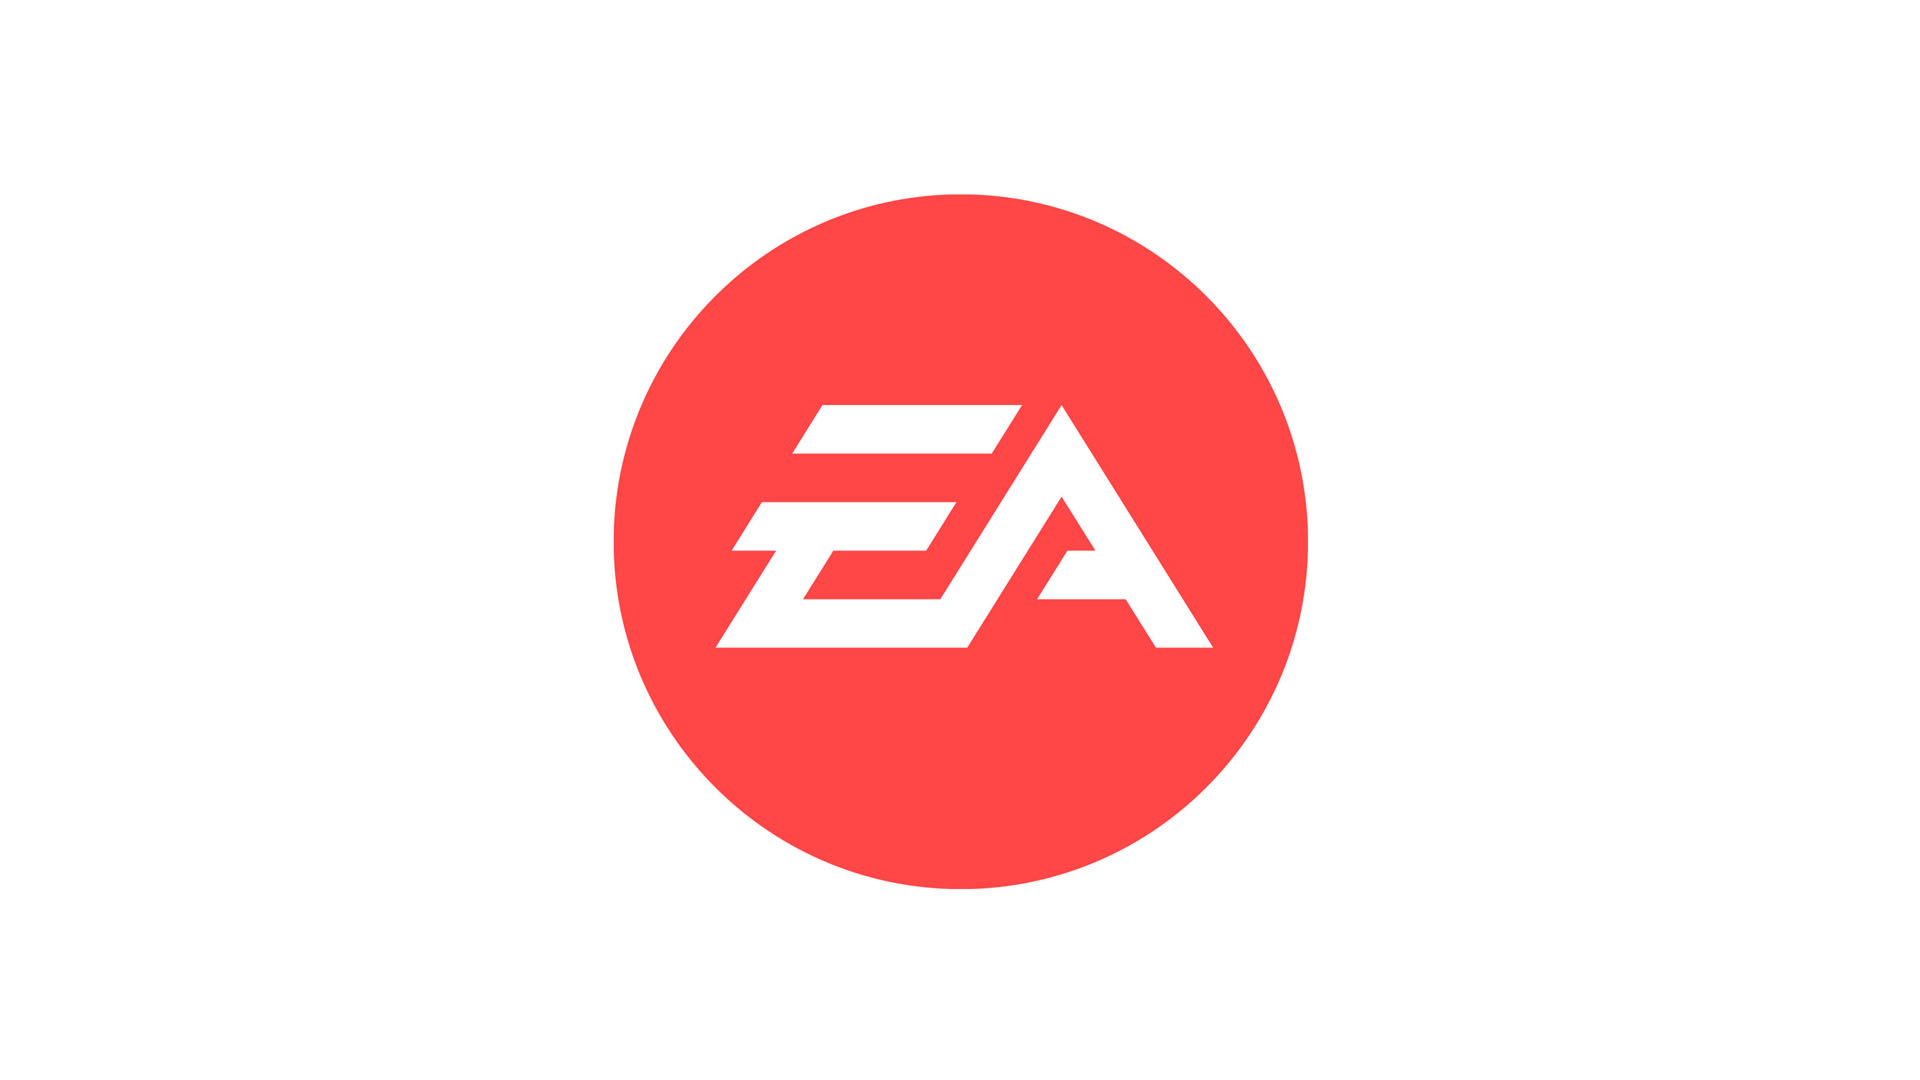 Electronic Arts is releasing a major IP